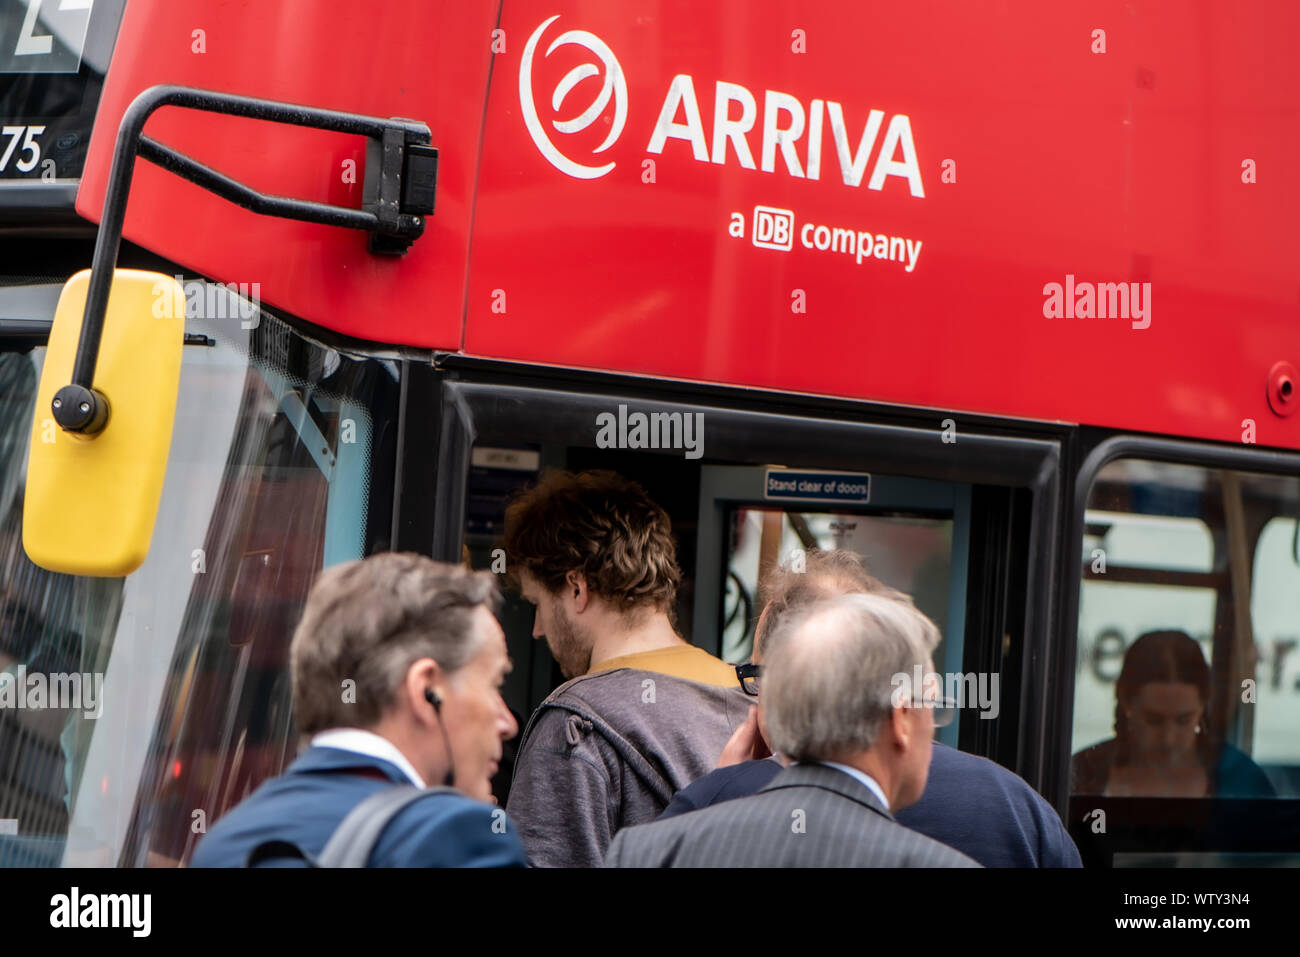 London commuters board a red Arriva bus at Waterloo Station, London, UK Stock Photo